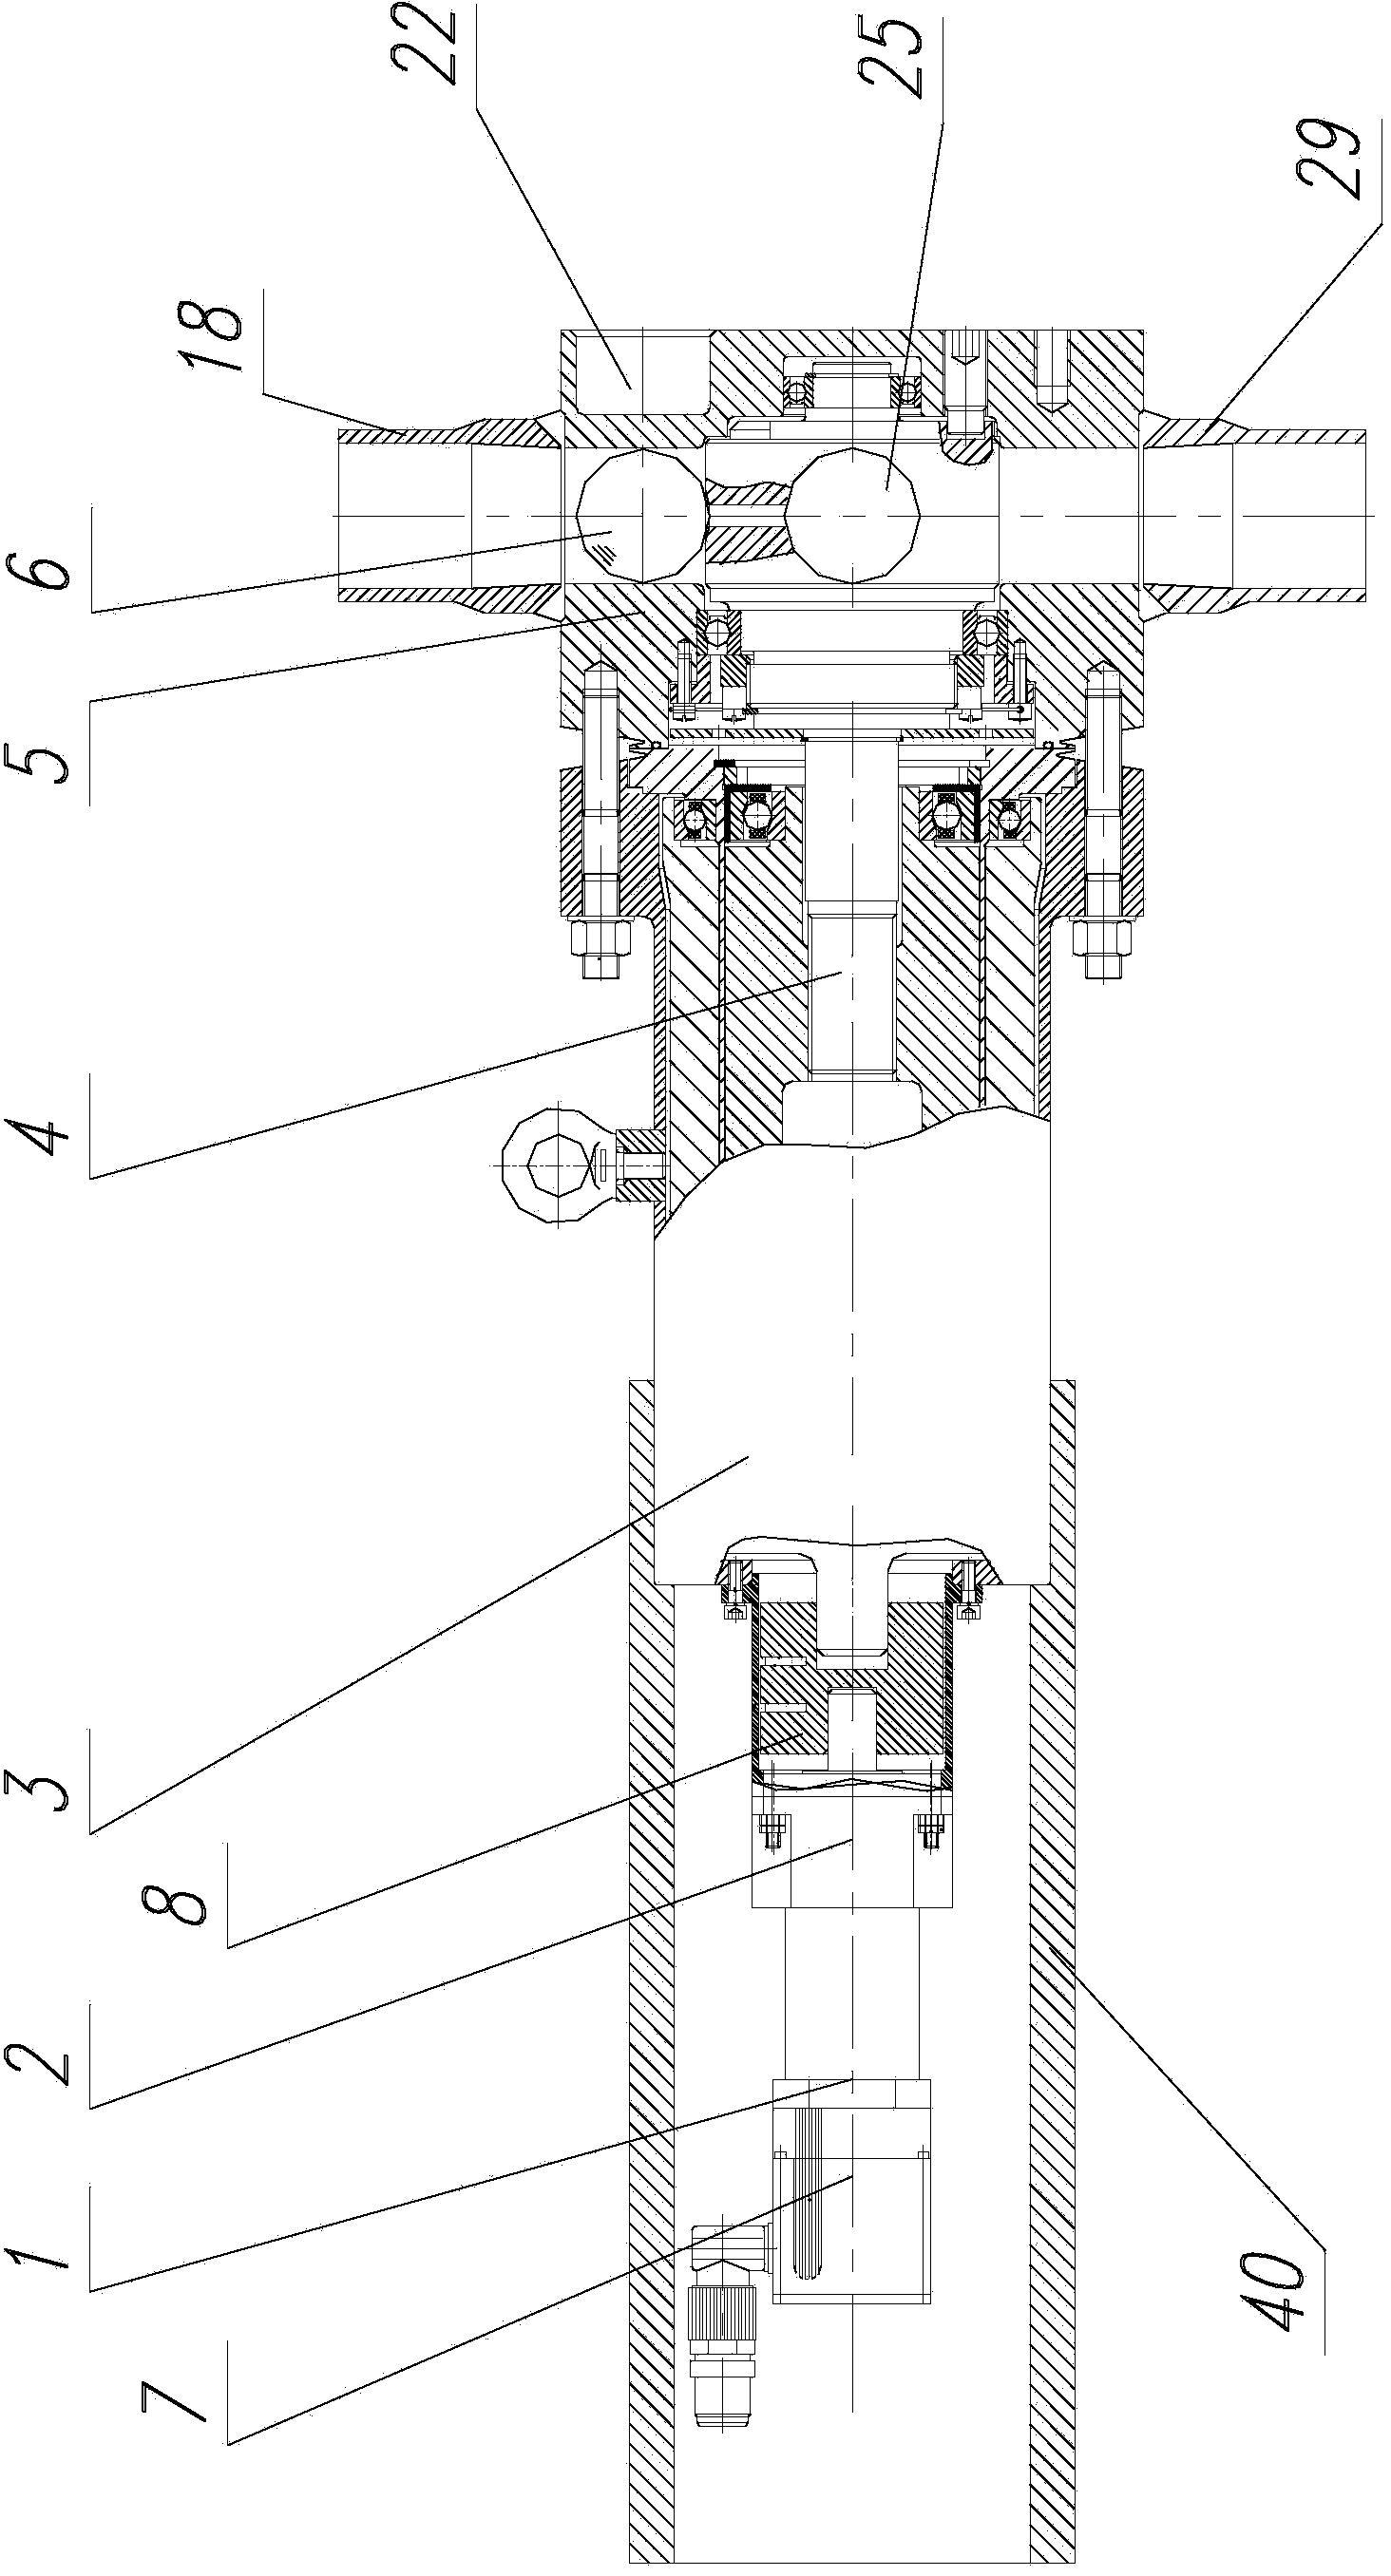 Burnup measuring and positioning device applied to high-temperature gas cooled reactor